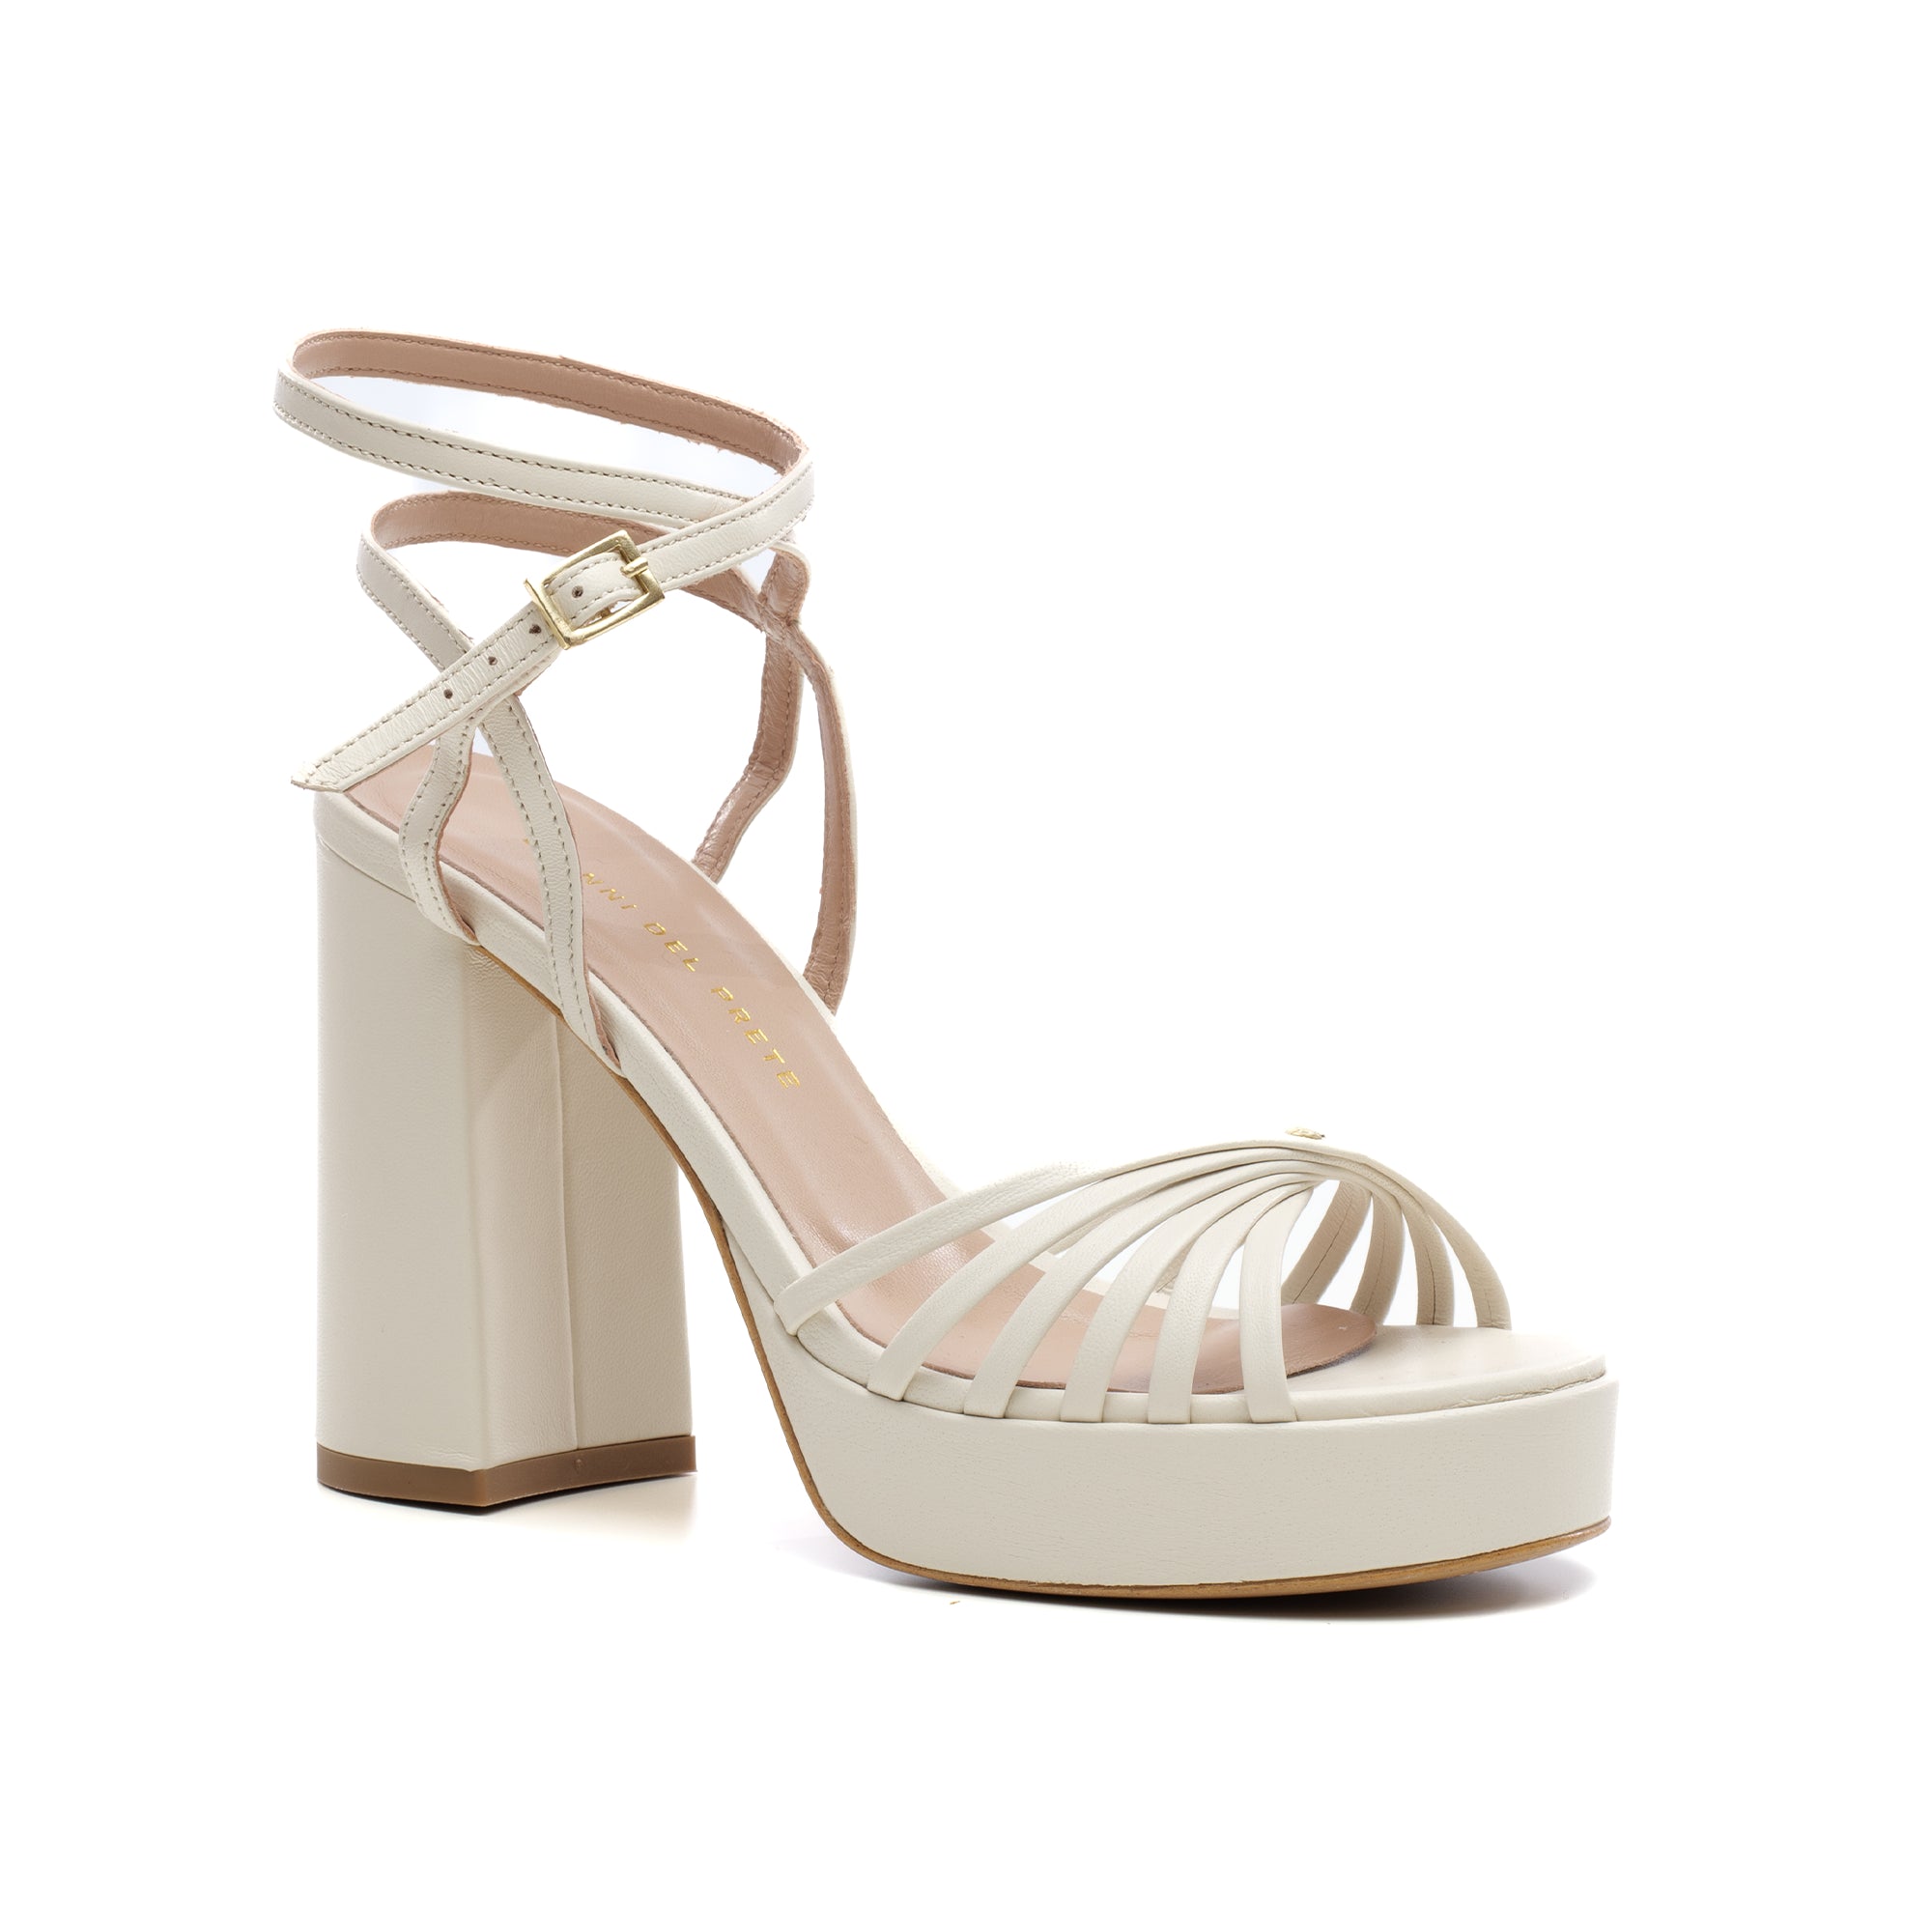 Alma platform sandal and wide heel with ankle strap in butter leather